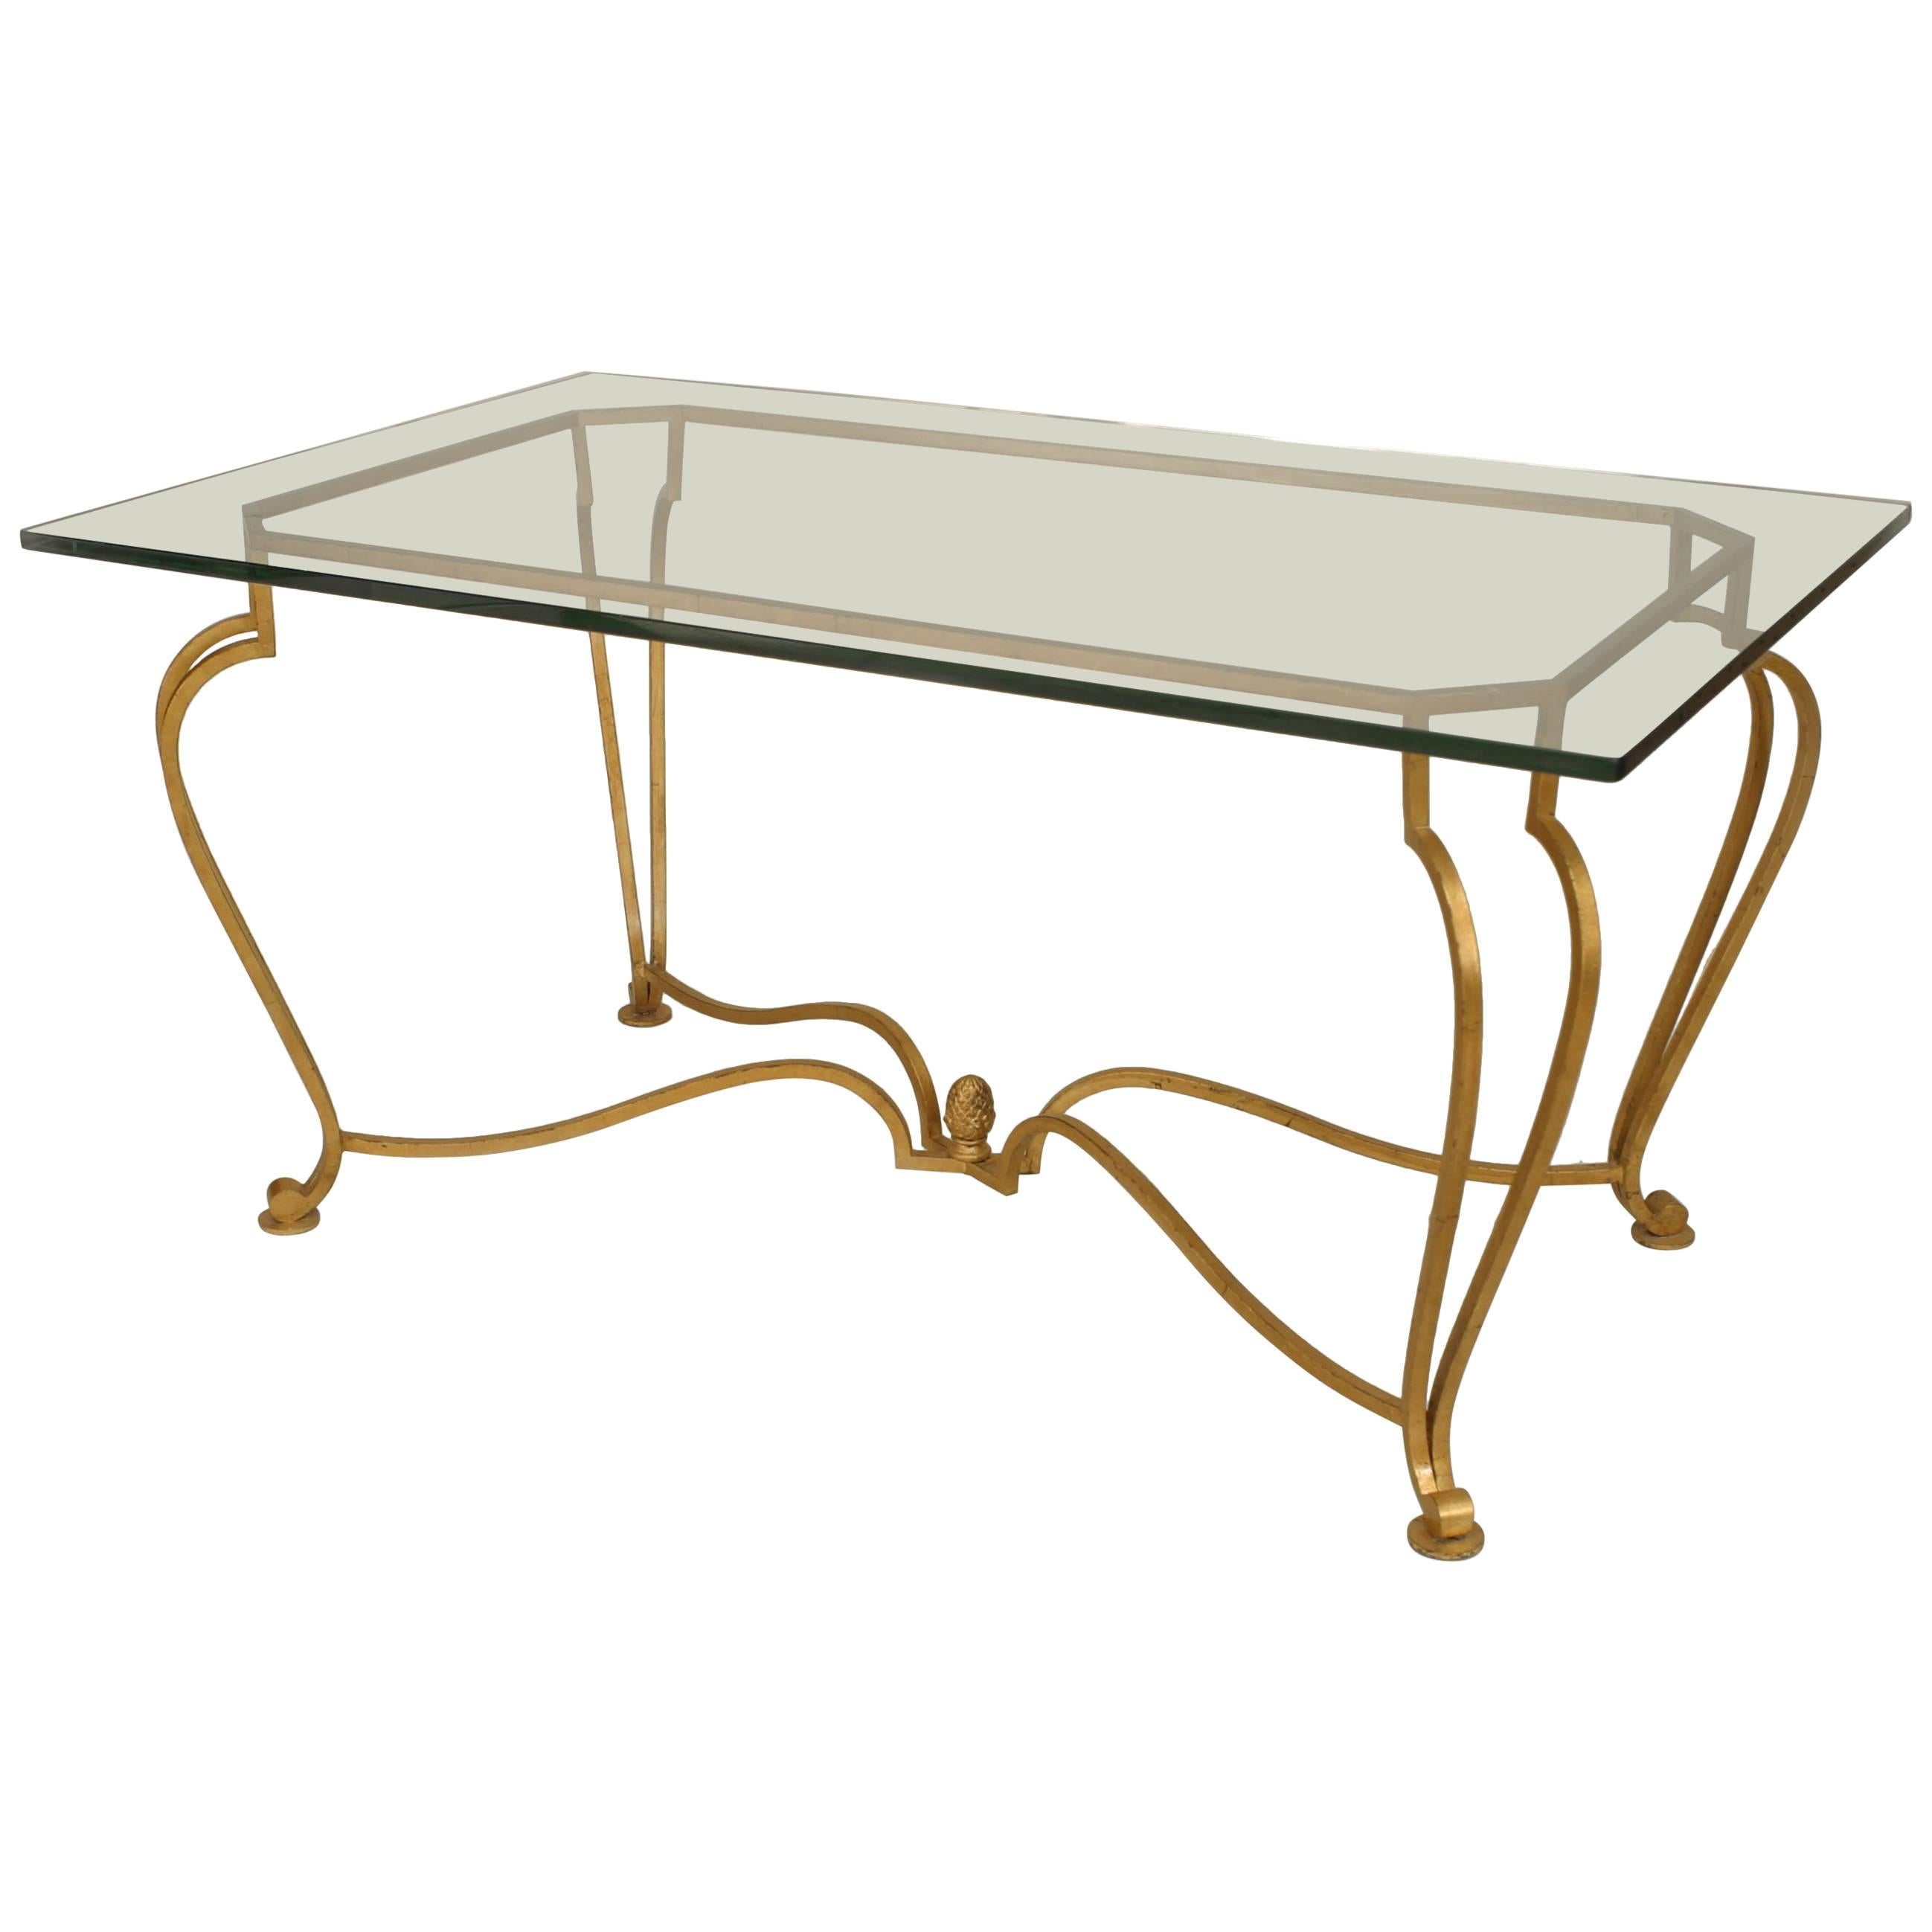 American Post-War Gilt Center Table with Glass Top